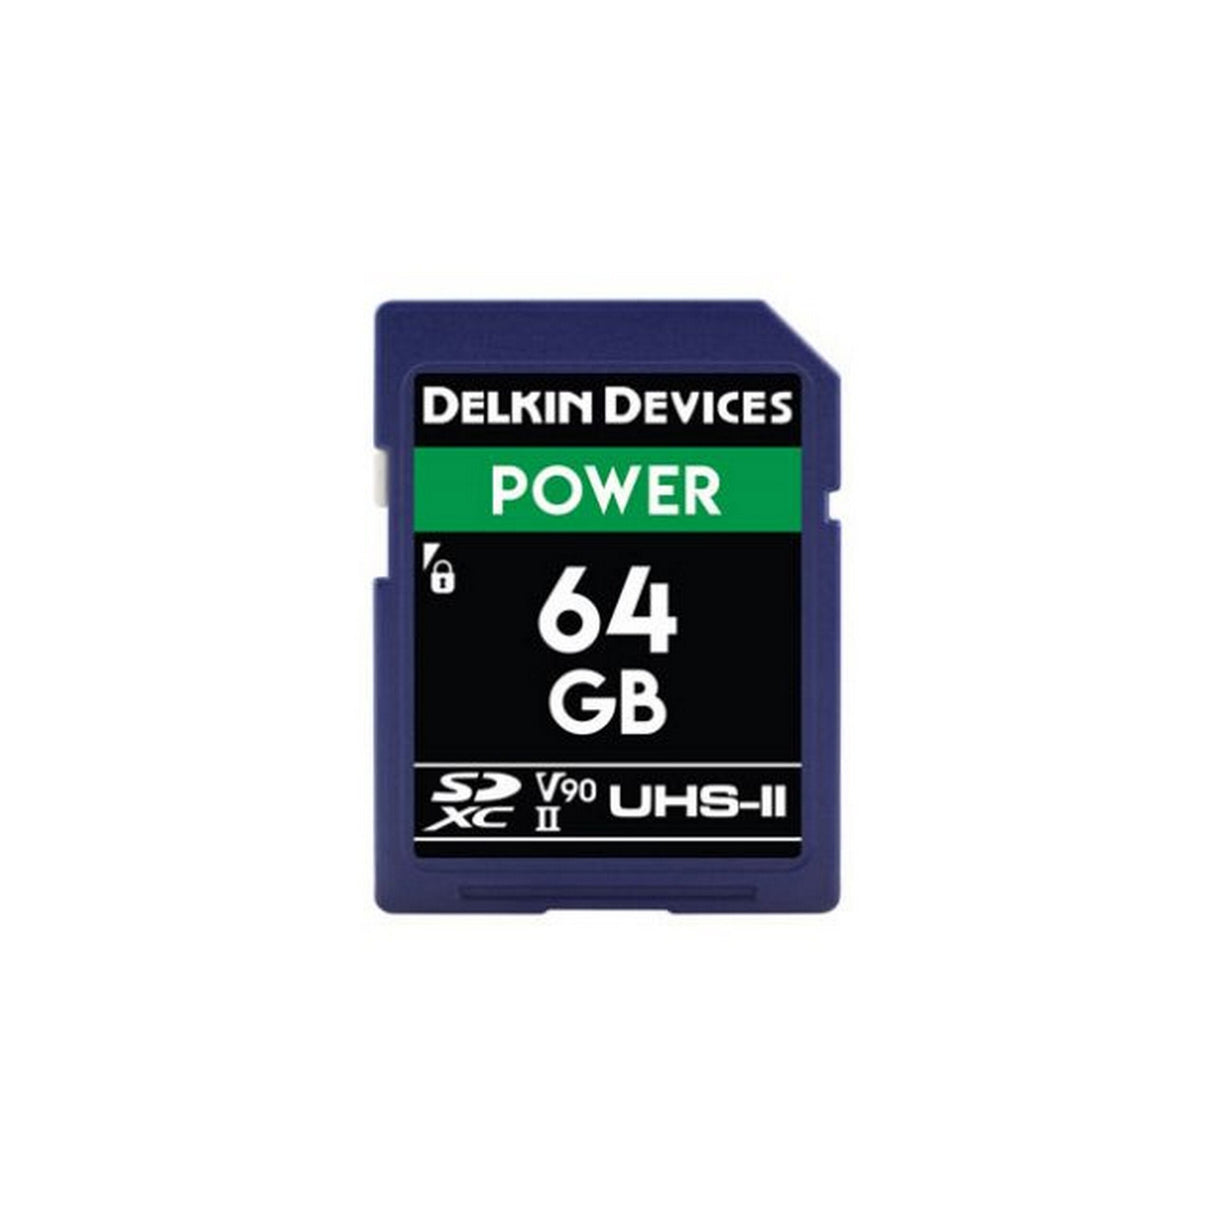 Delkin Devices Power UHS-II U3/V90 SD Memory Card, 64GB